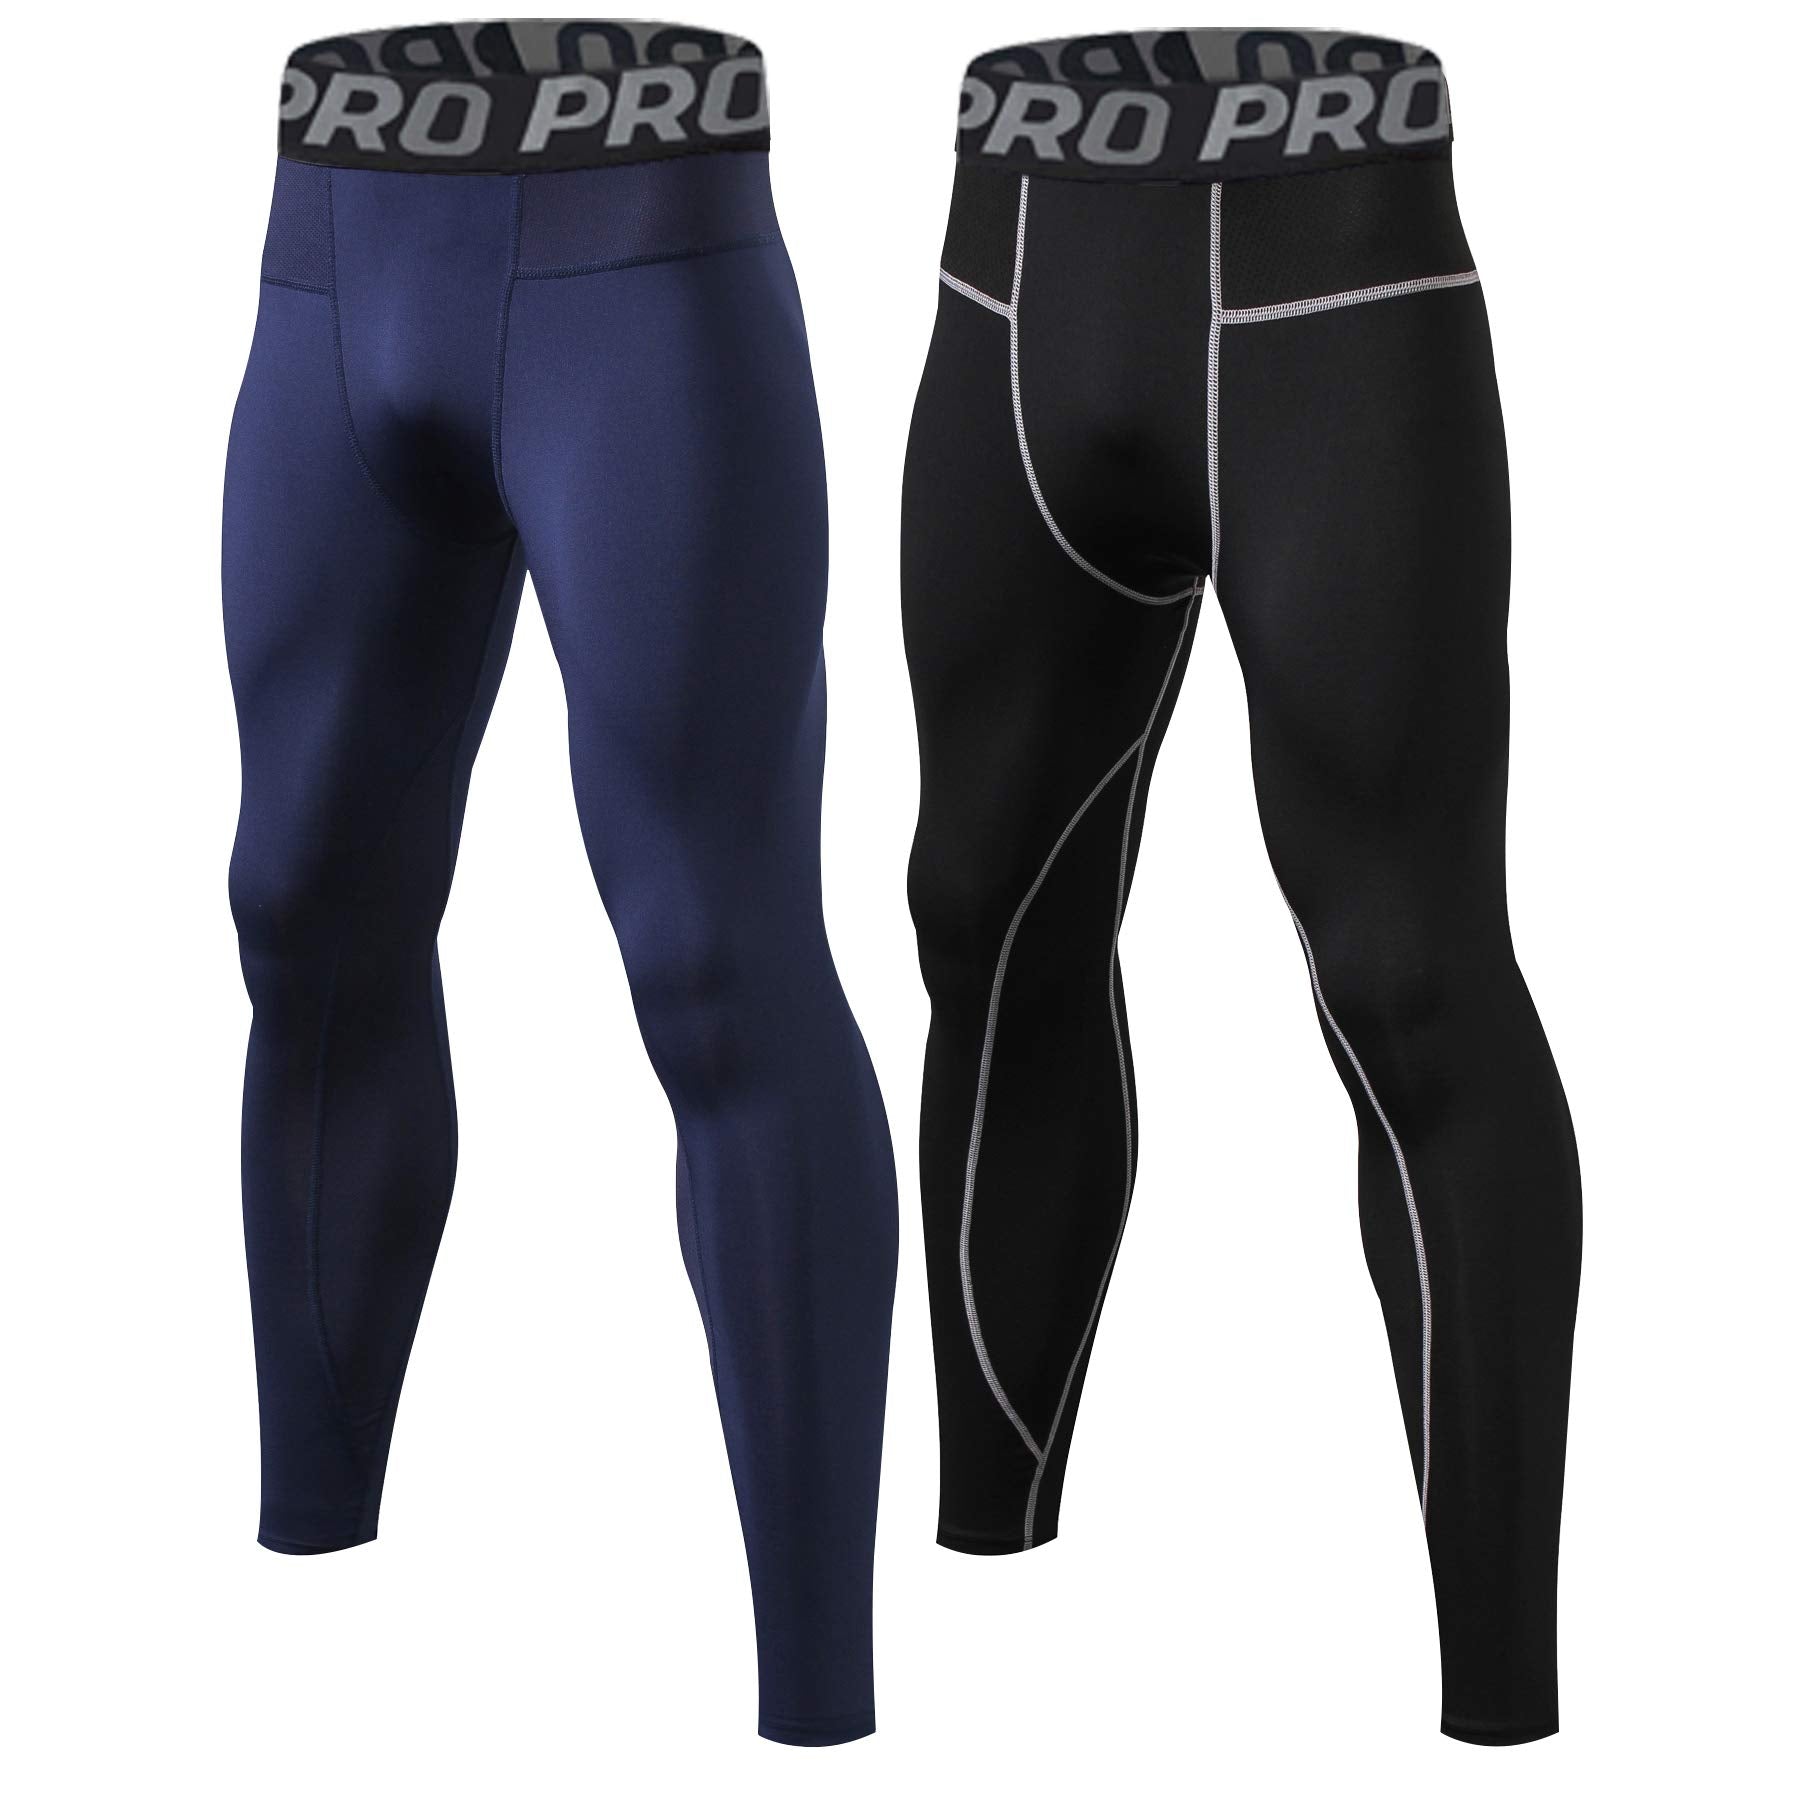 Men's Glossy Smooth Compression Pants Sports Workout Running Tights  Athletic